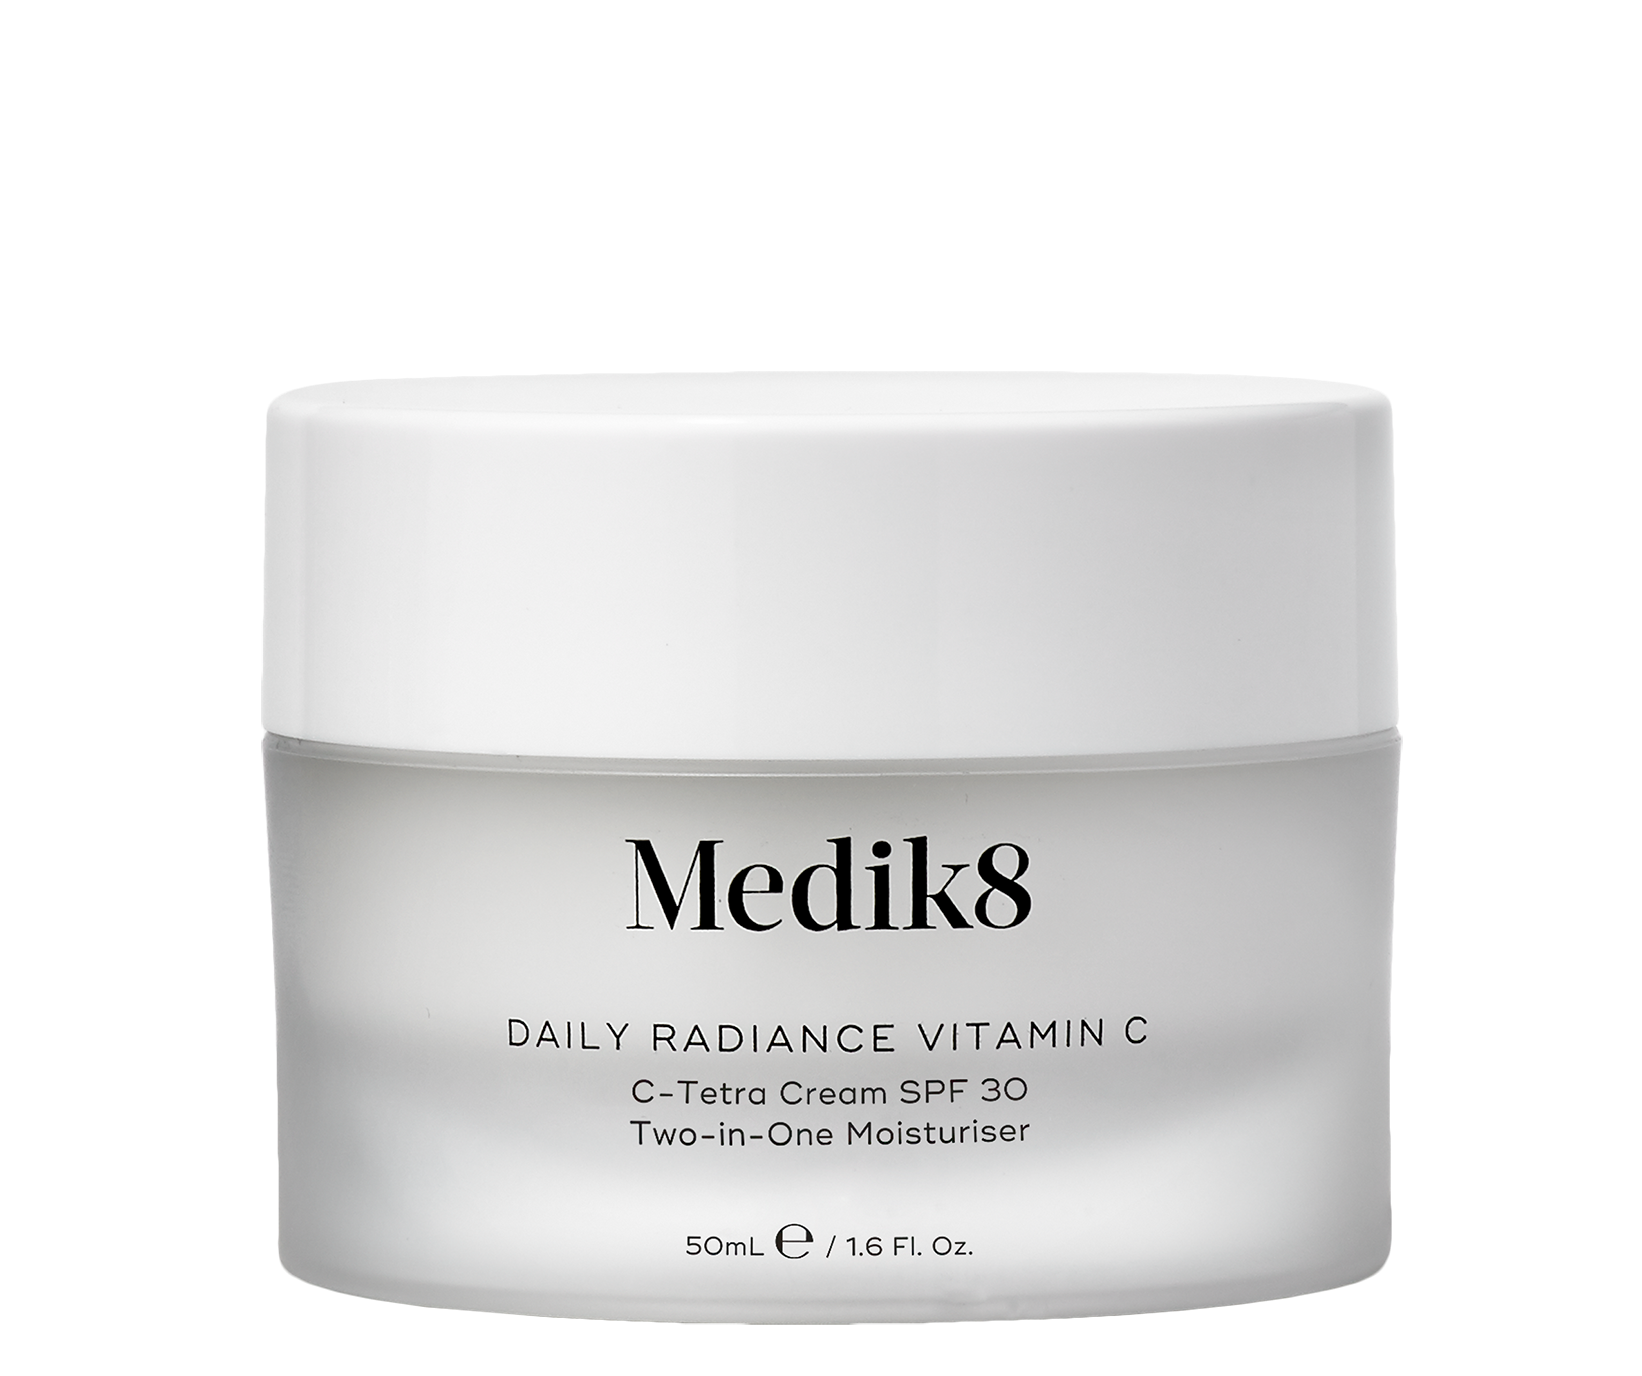 Daily Radiance Vitamin C A